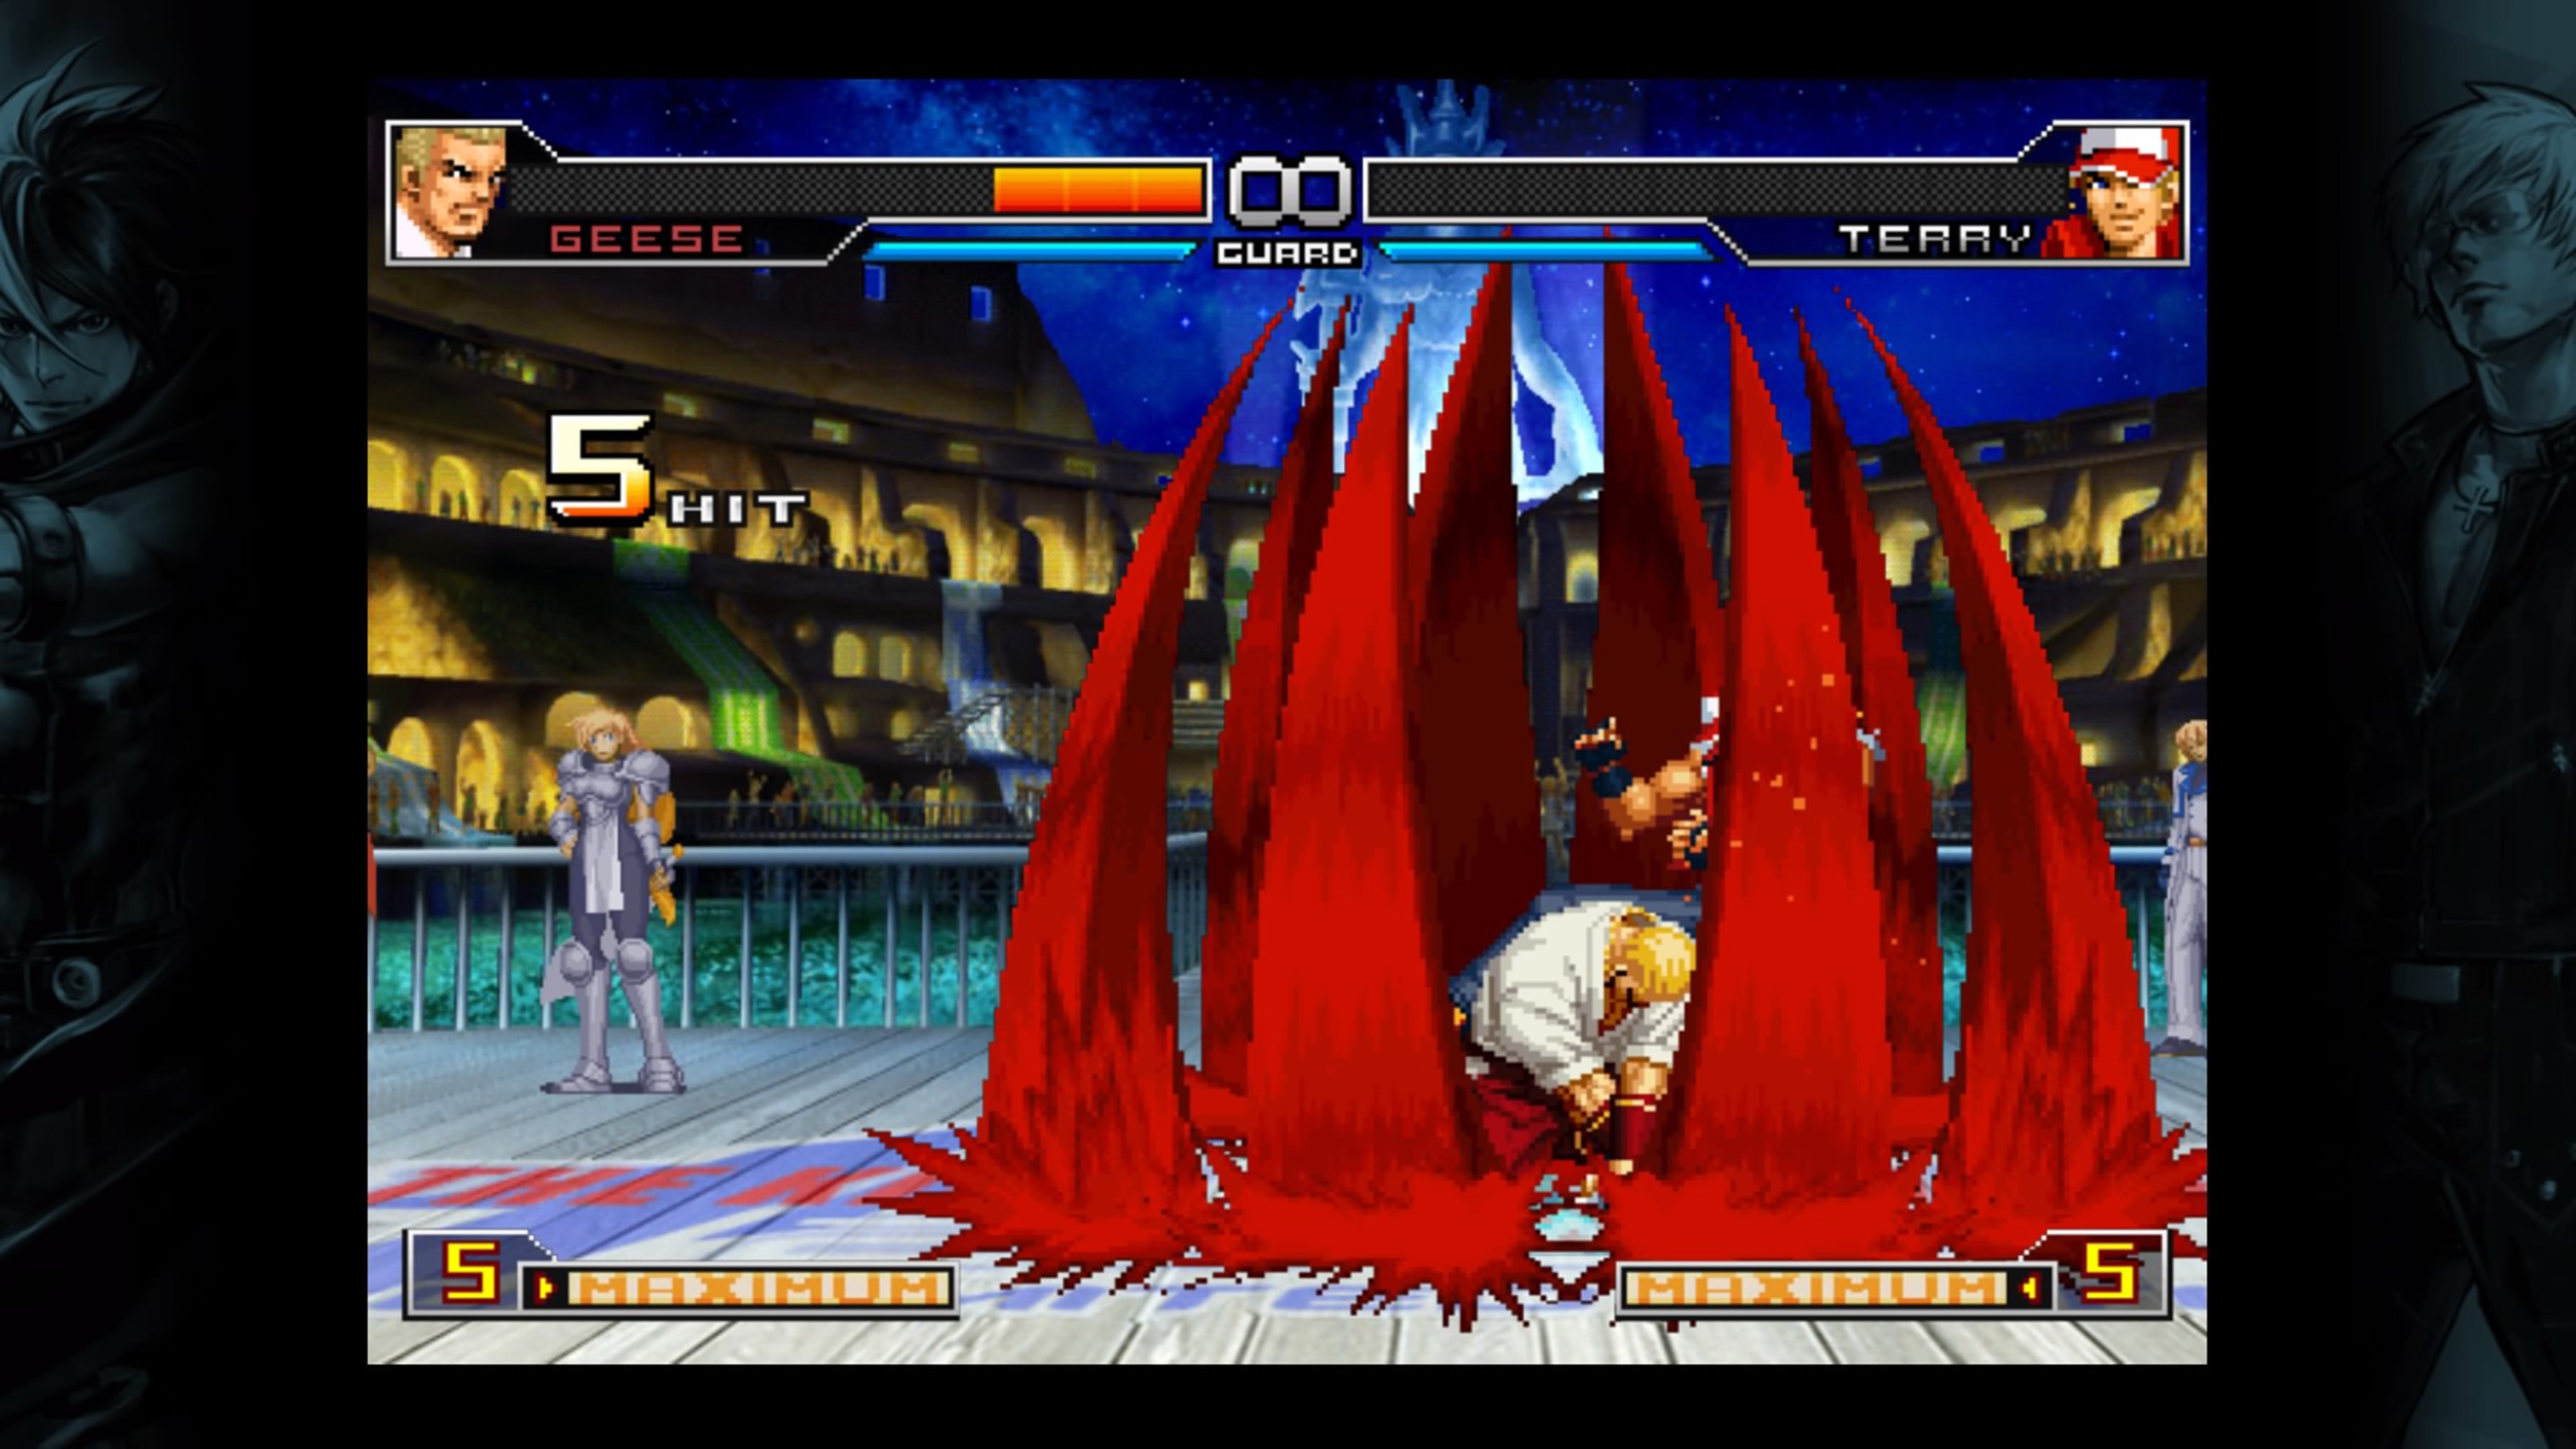 SNK drops King of Fighters 2002 Unlimited Match on PS4 and PS5 - Dot Esports